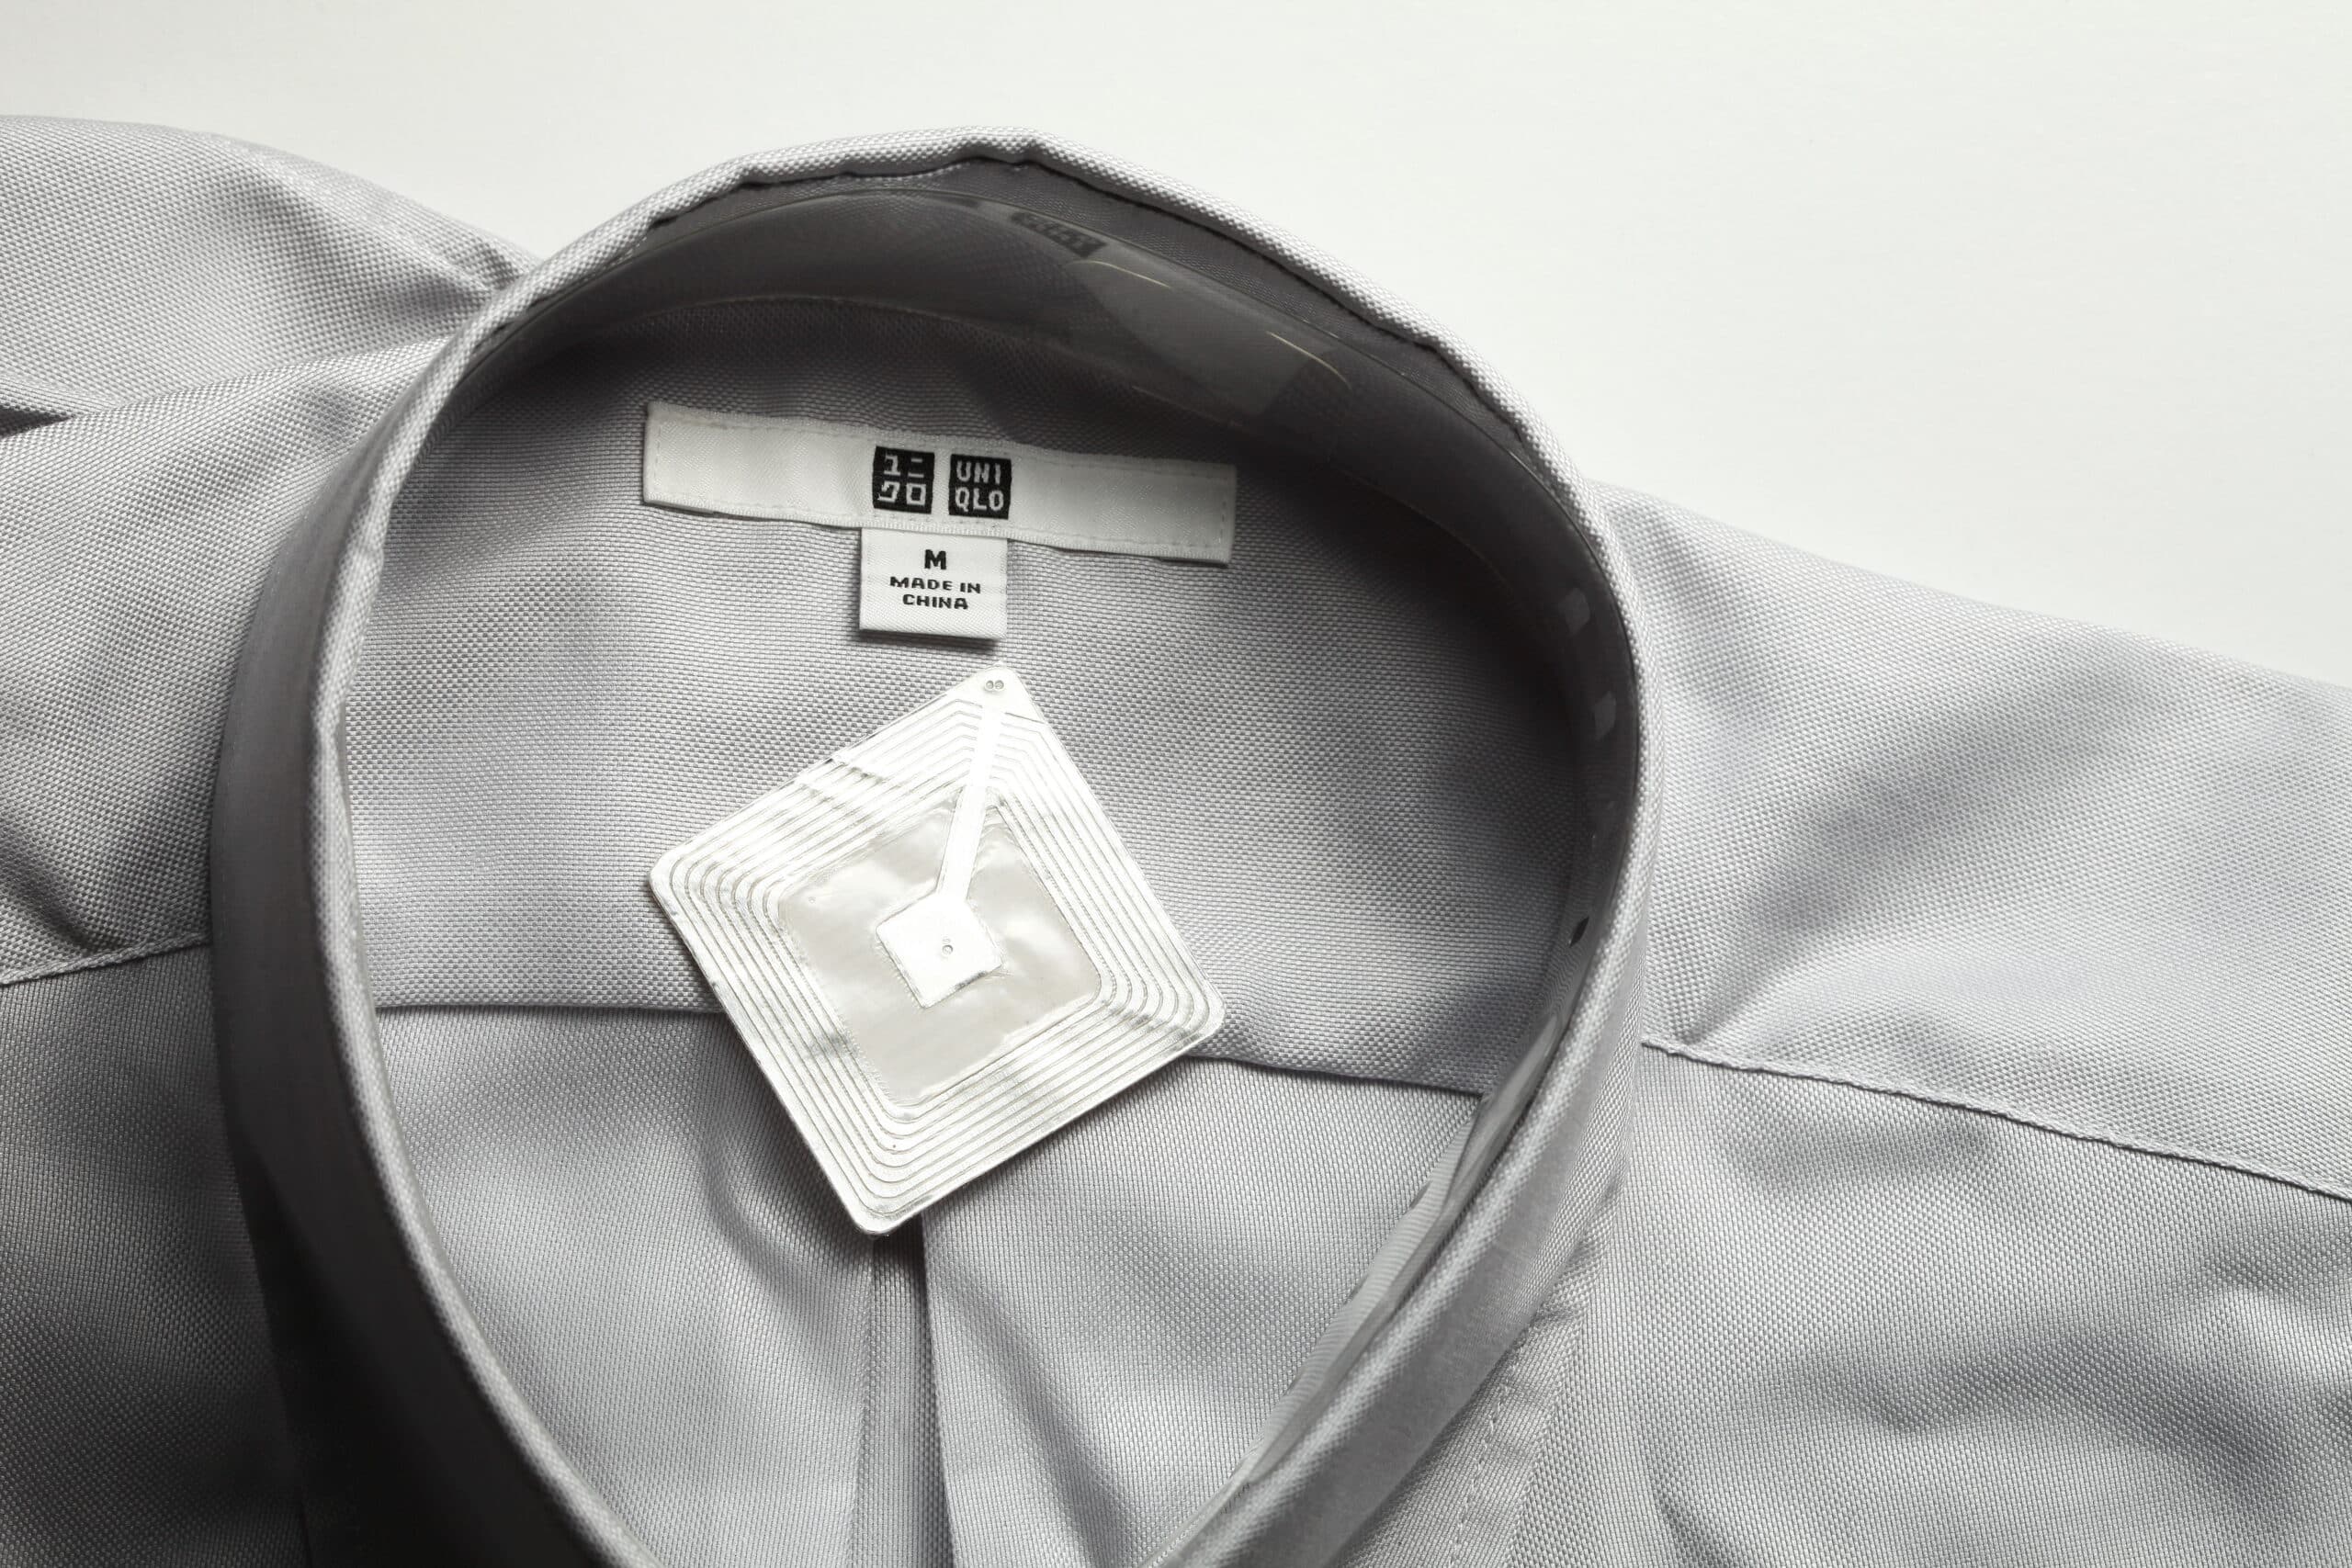 Men's shirt from Uniqlo with RFID tag